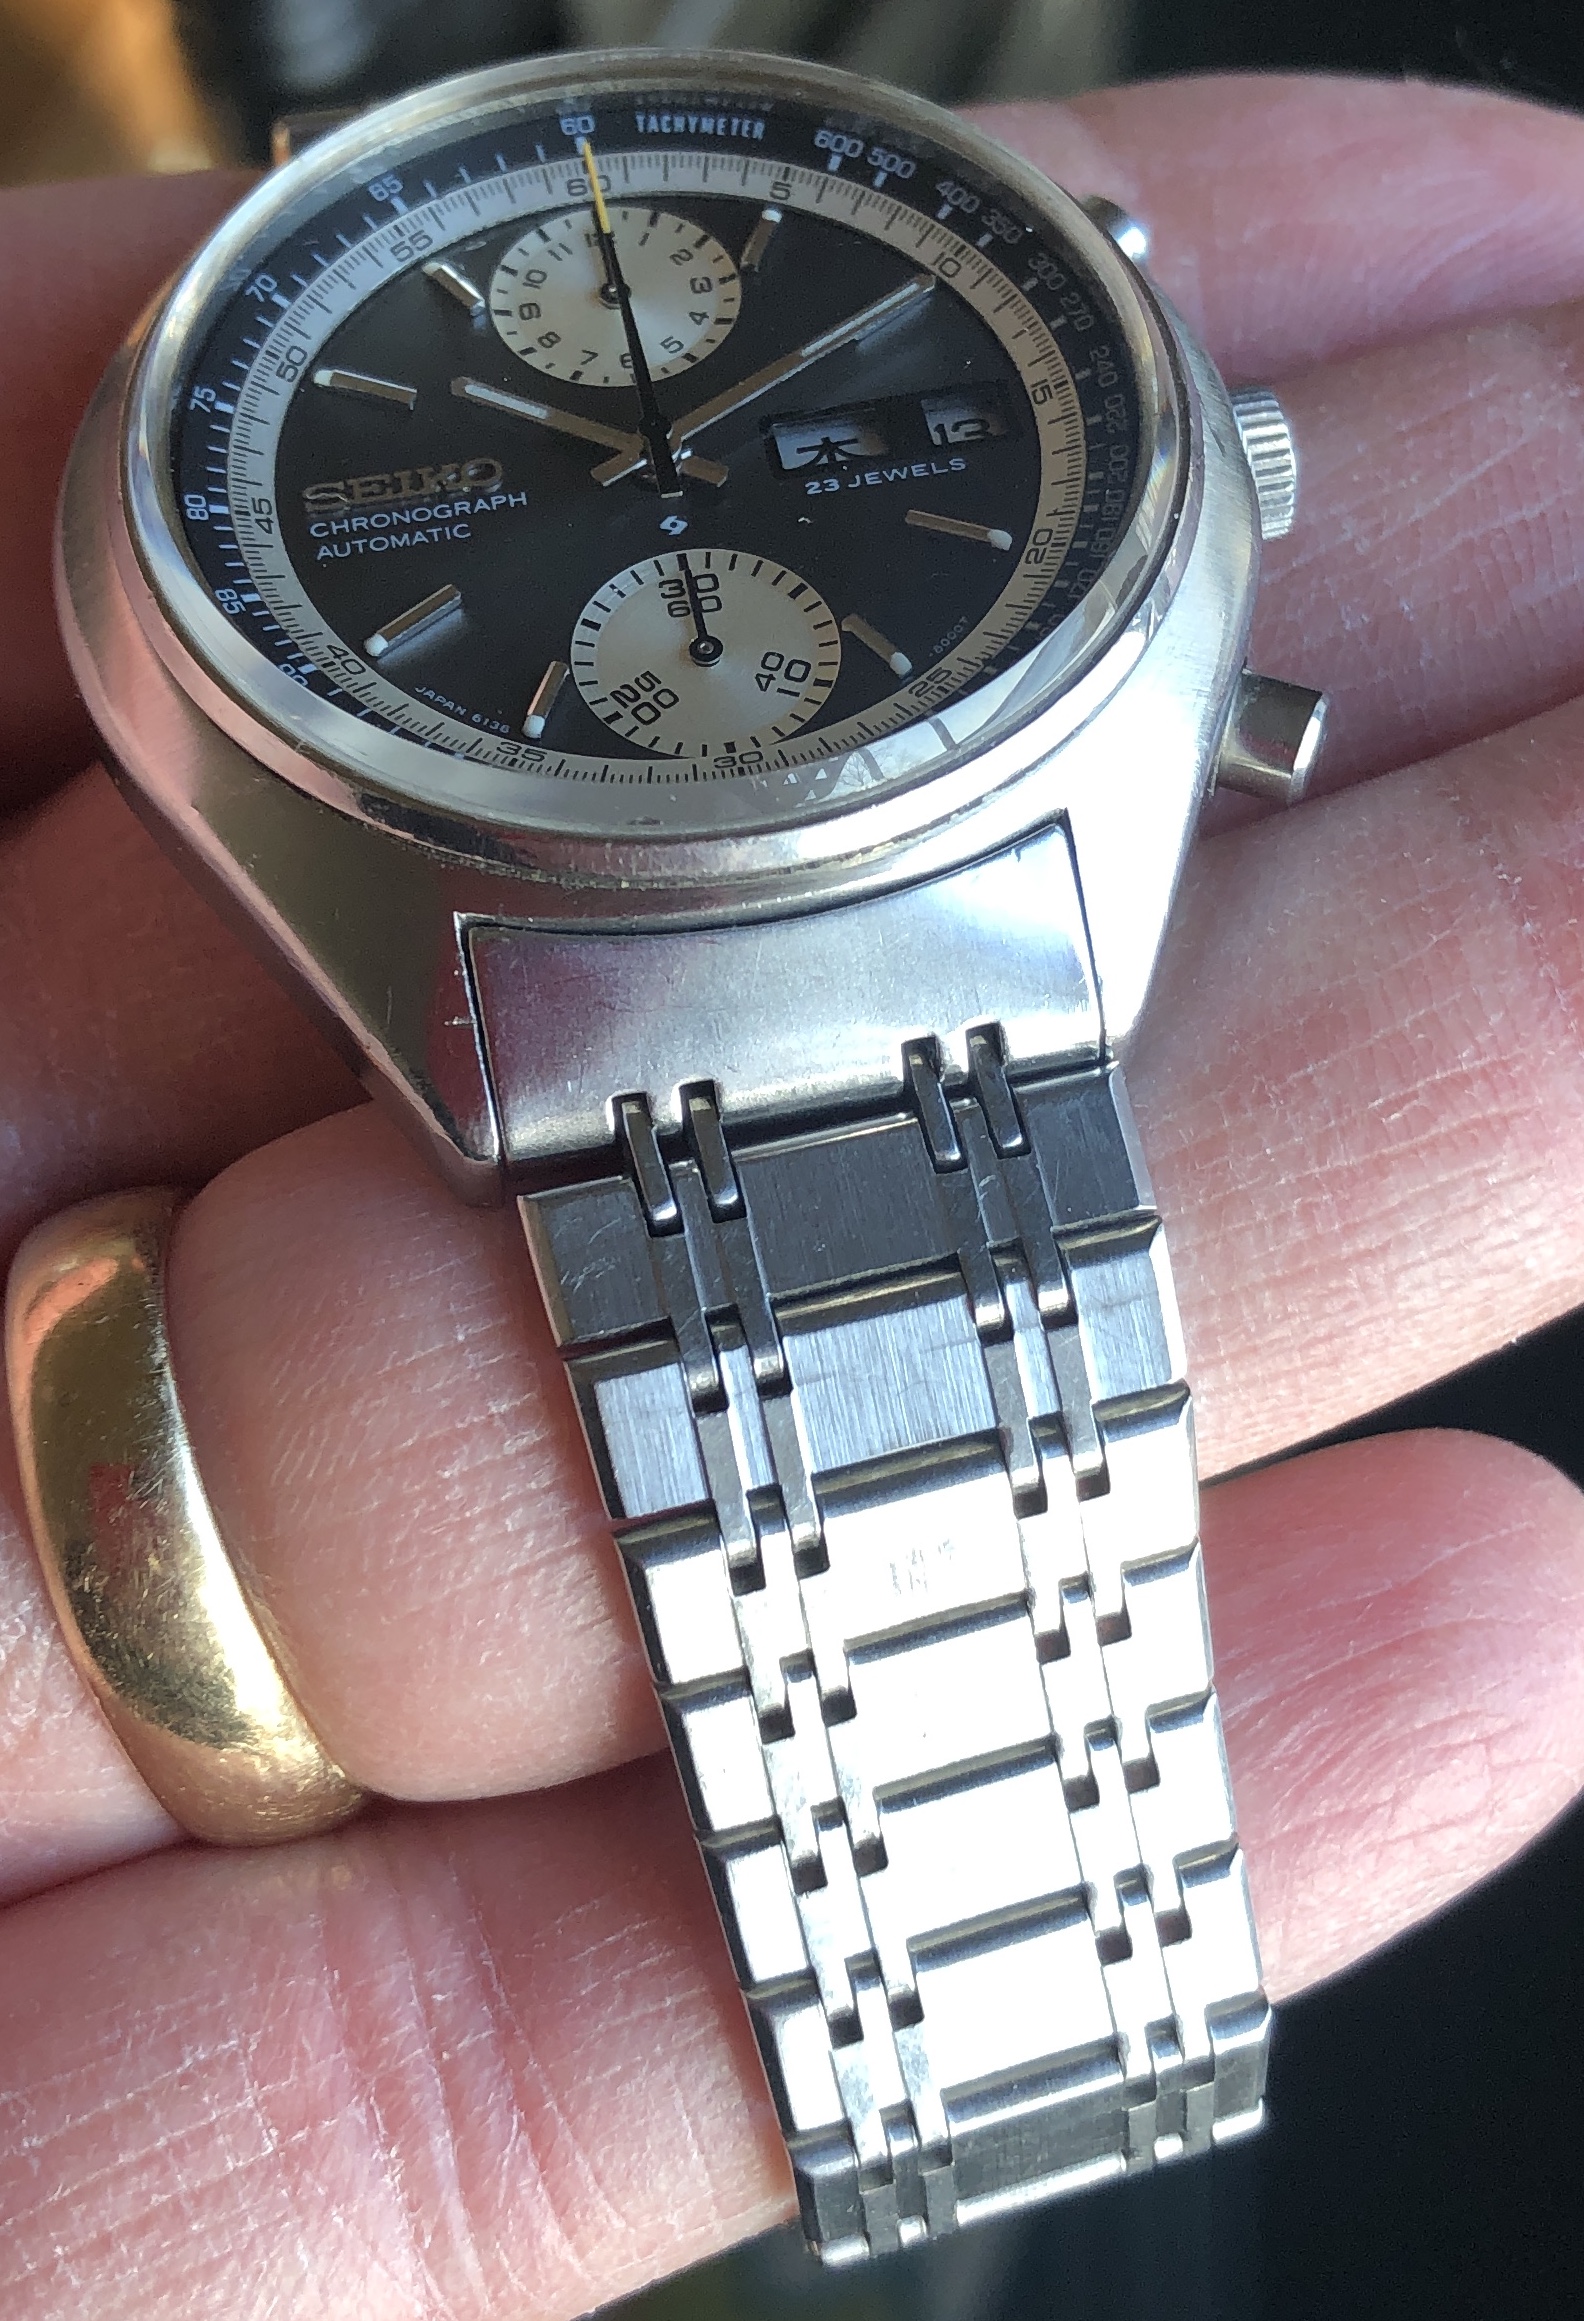 SOLD - Seiko 6138 8000 Baby Panda chronograph, Charcoal gray dial with  bracelet. | Omega Forums